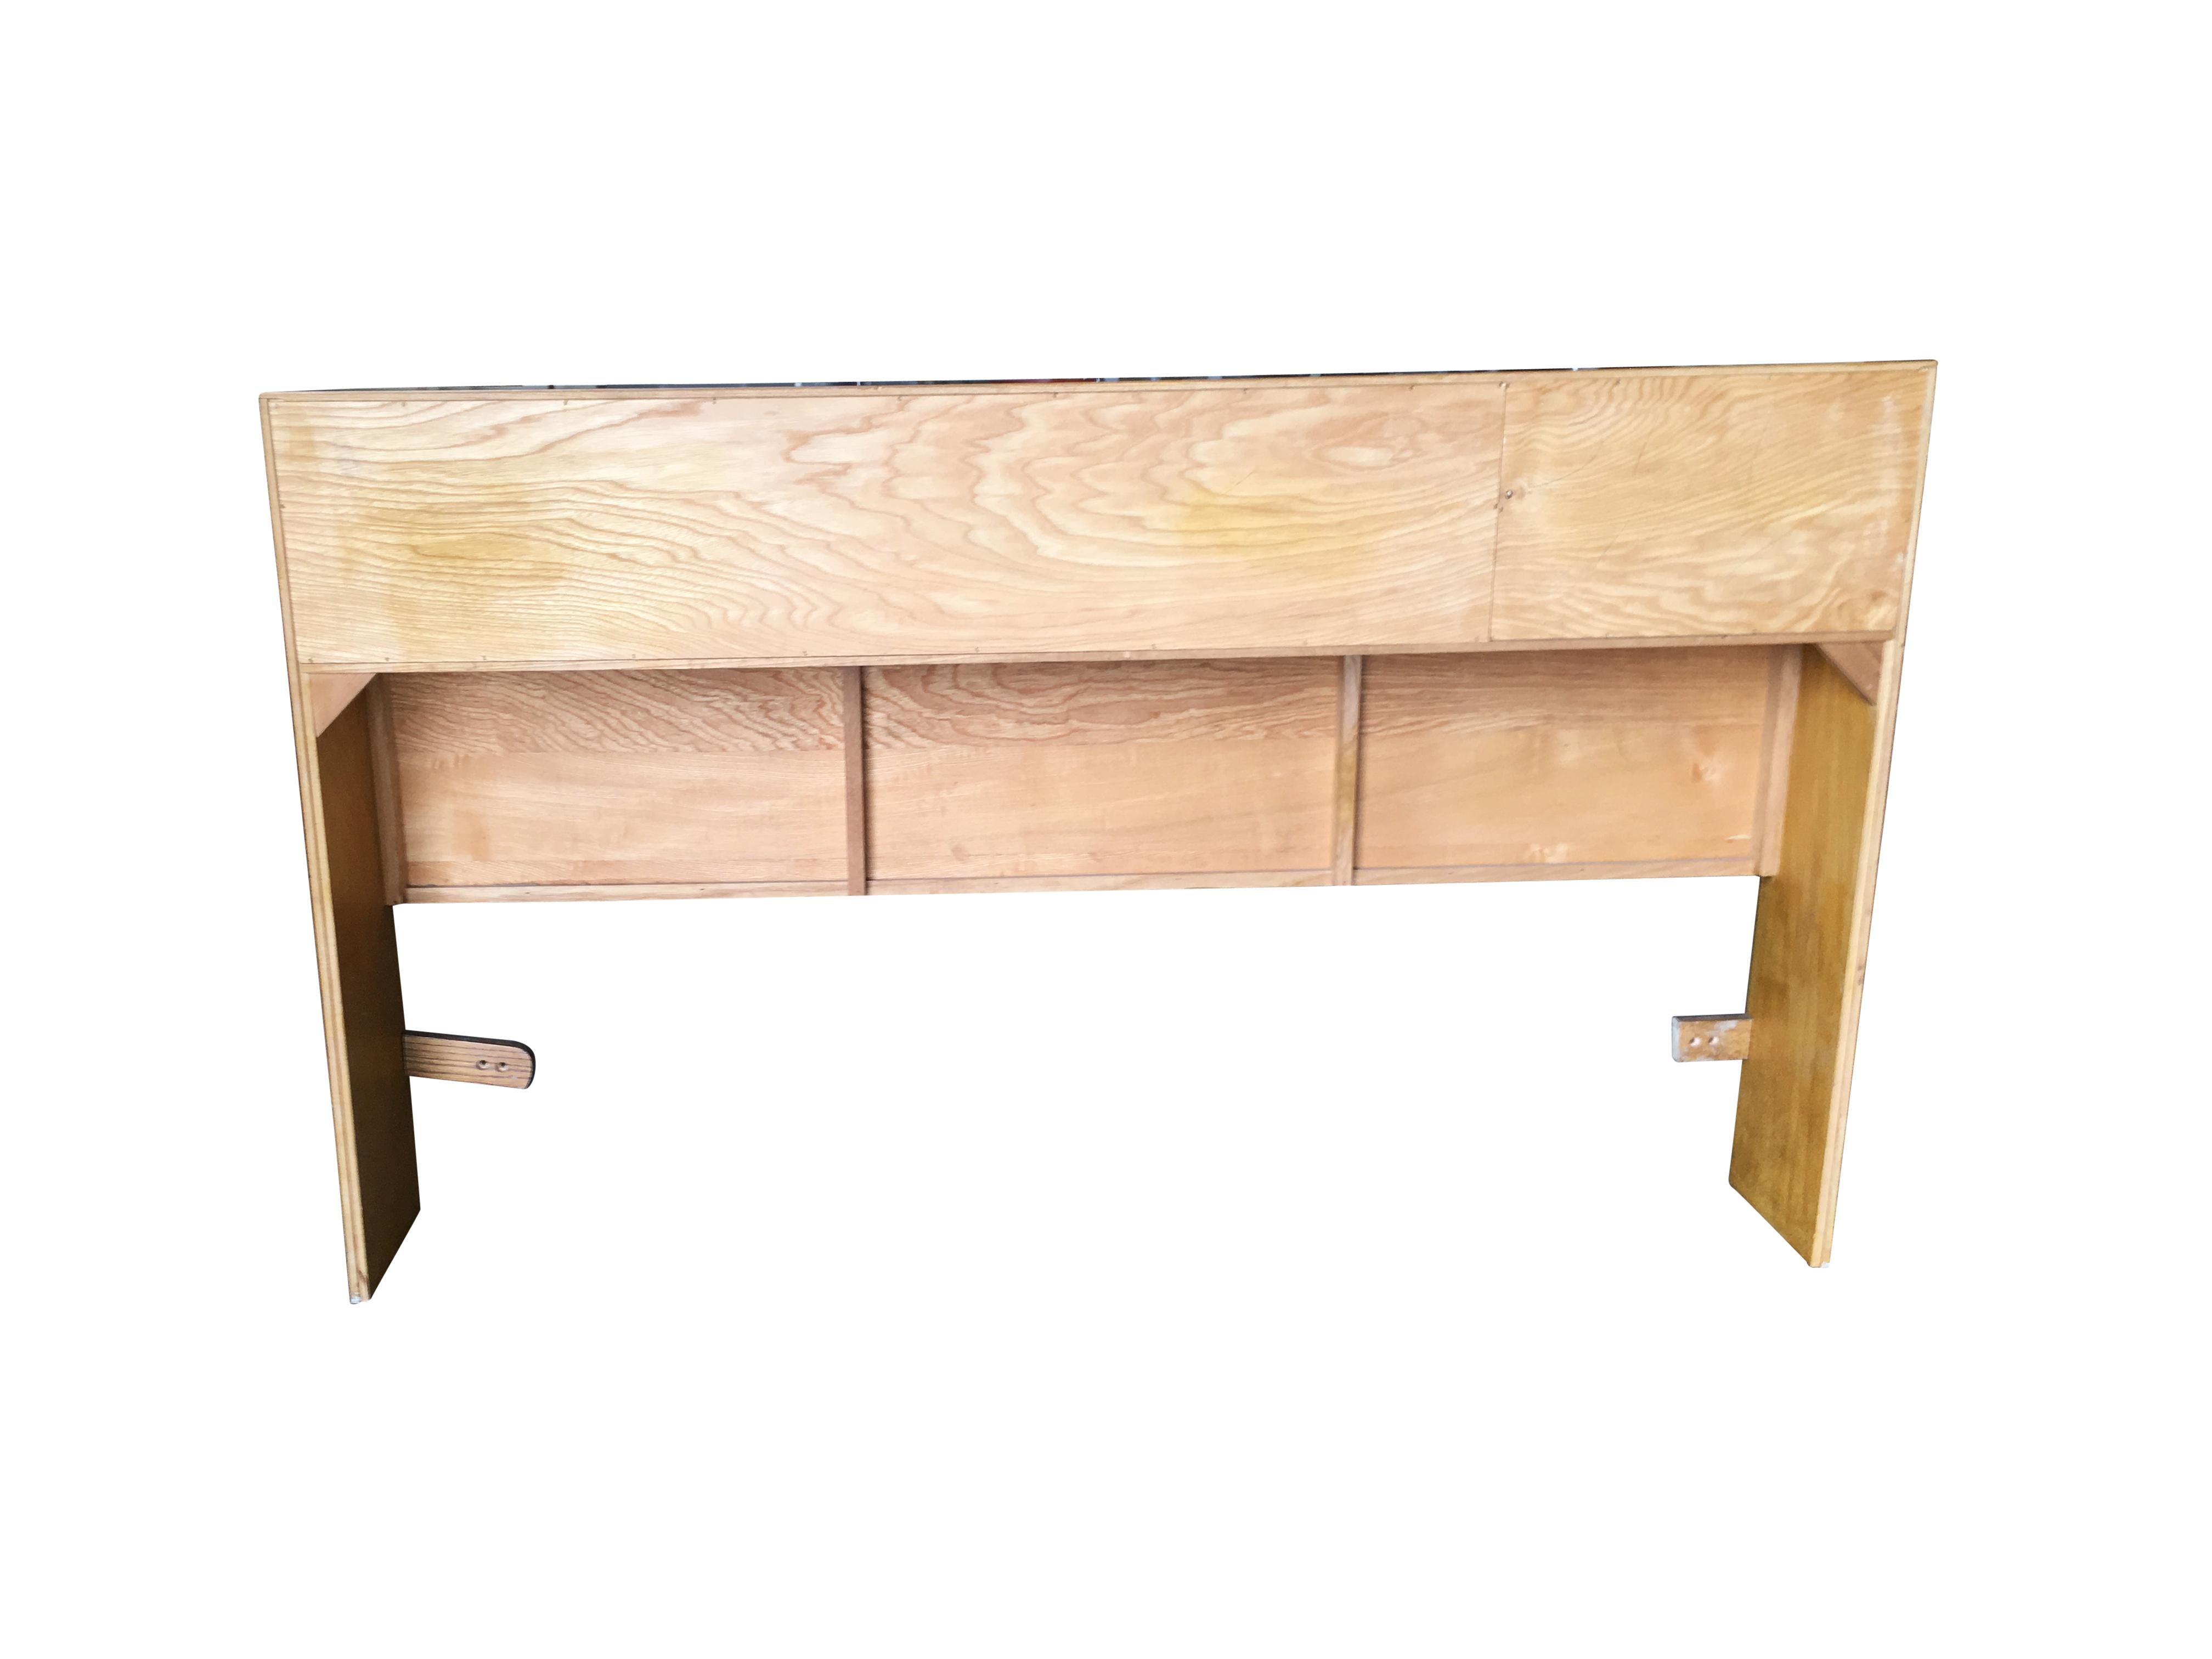 Midcentury era queen-size oak headboard in the manner of Heywood Wakefield. The headboard features three compartments and one sliding door. The top section doubles a shelf for extra storage decorating potential.